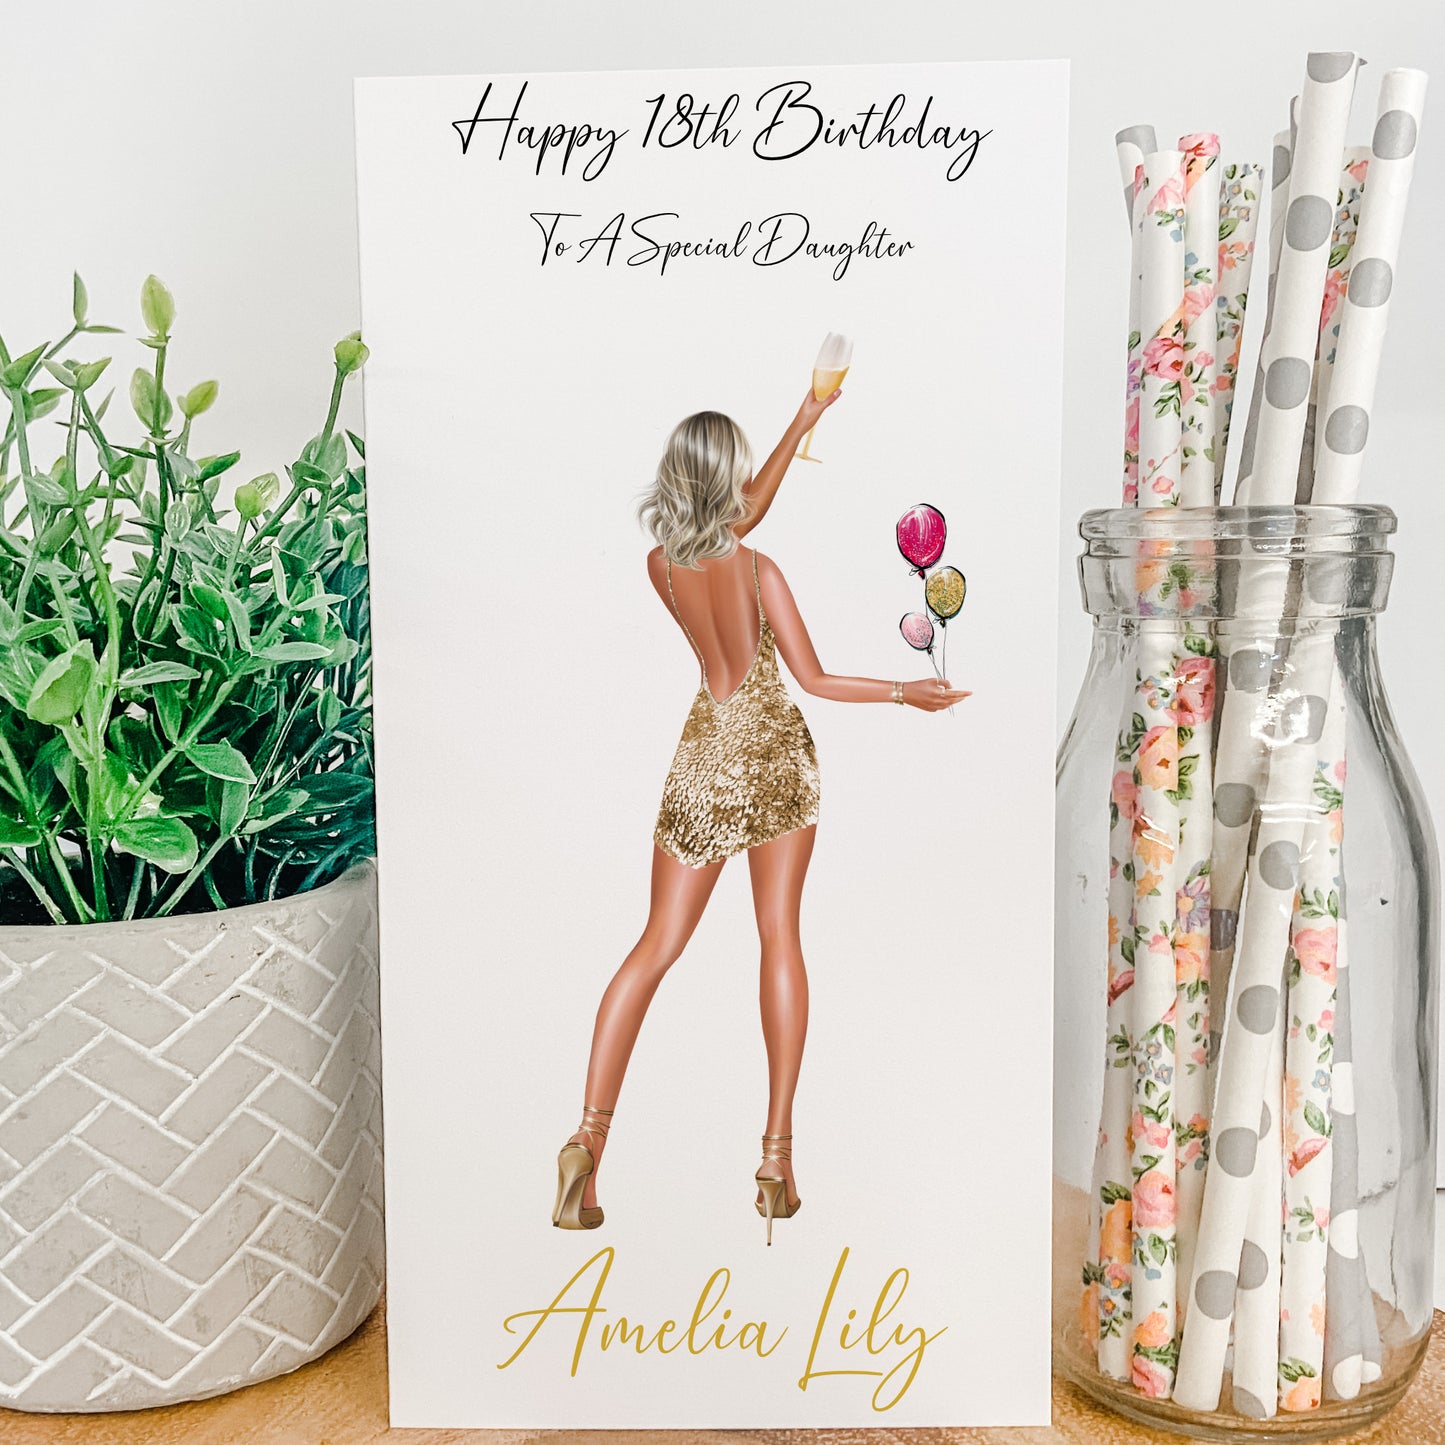 a birthday card with a picture of a woman holding a rose